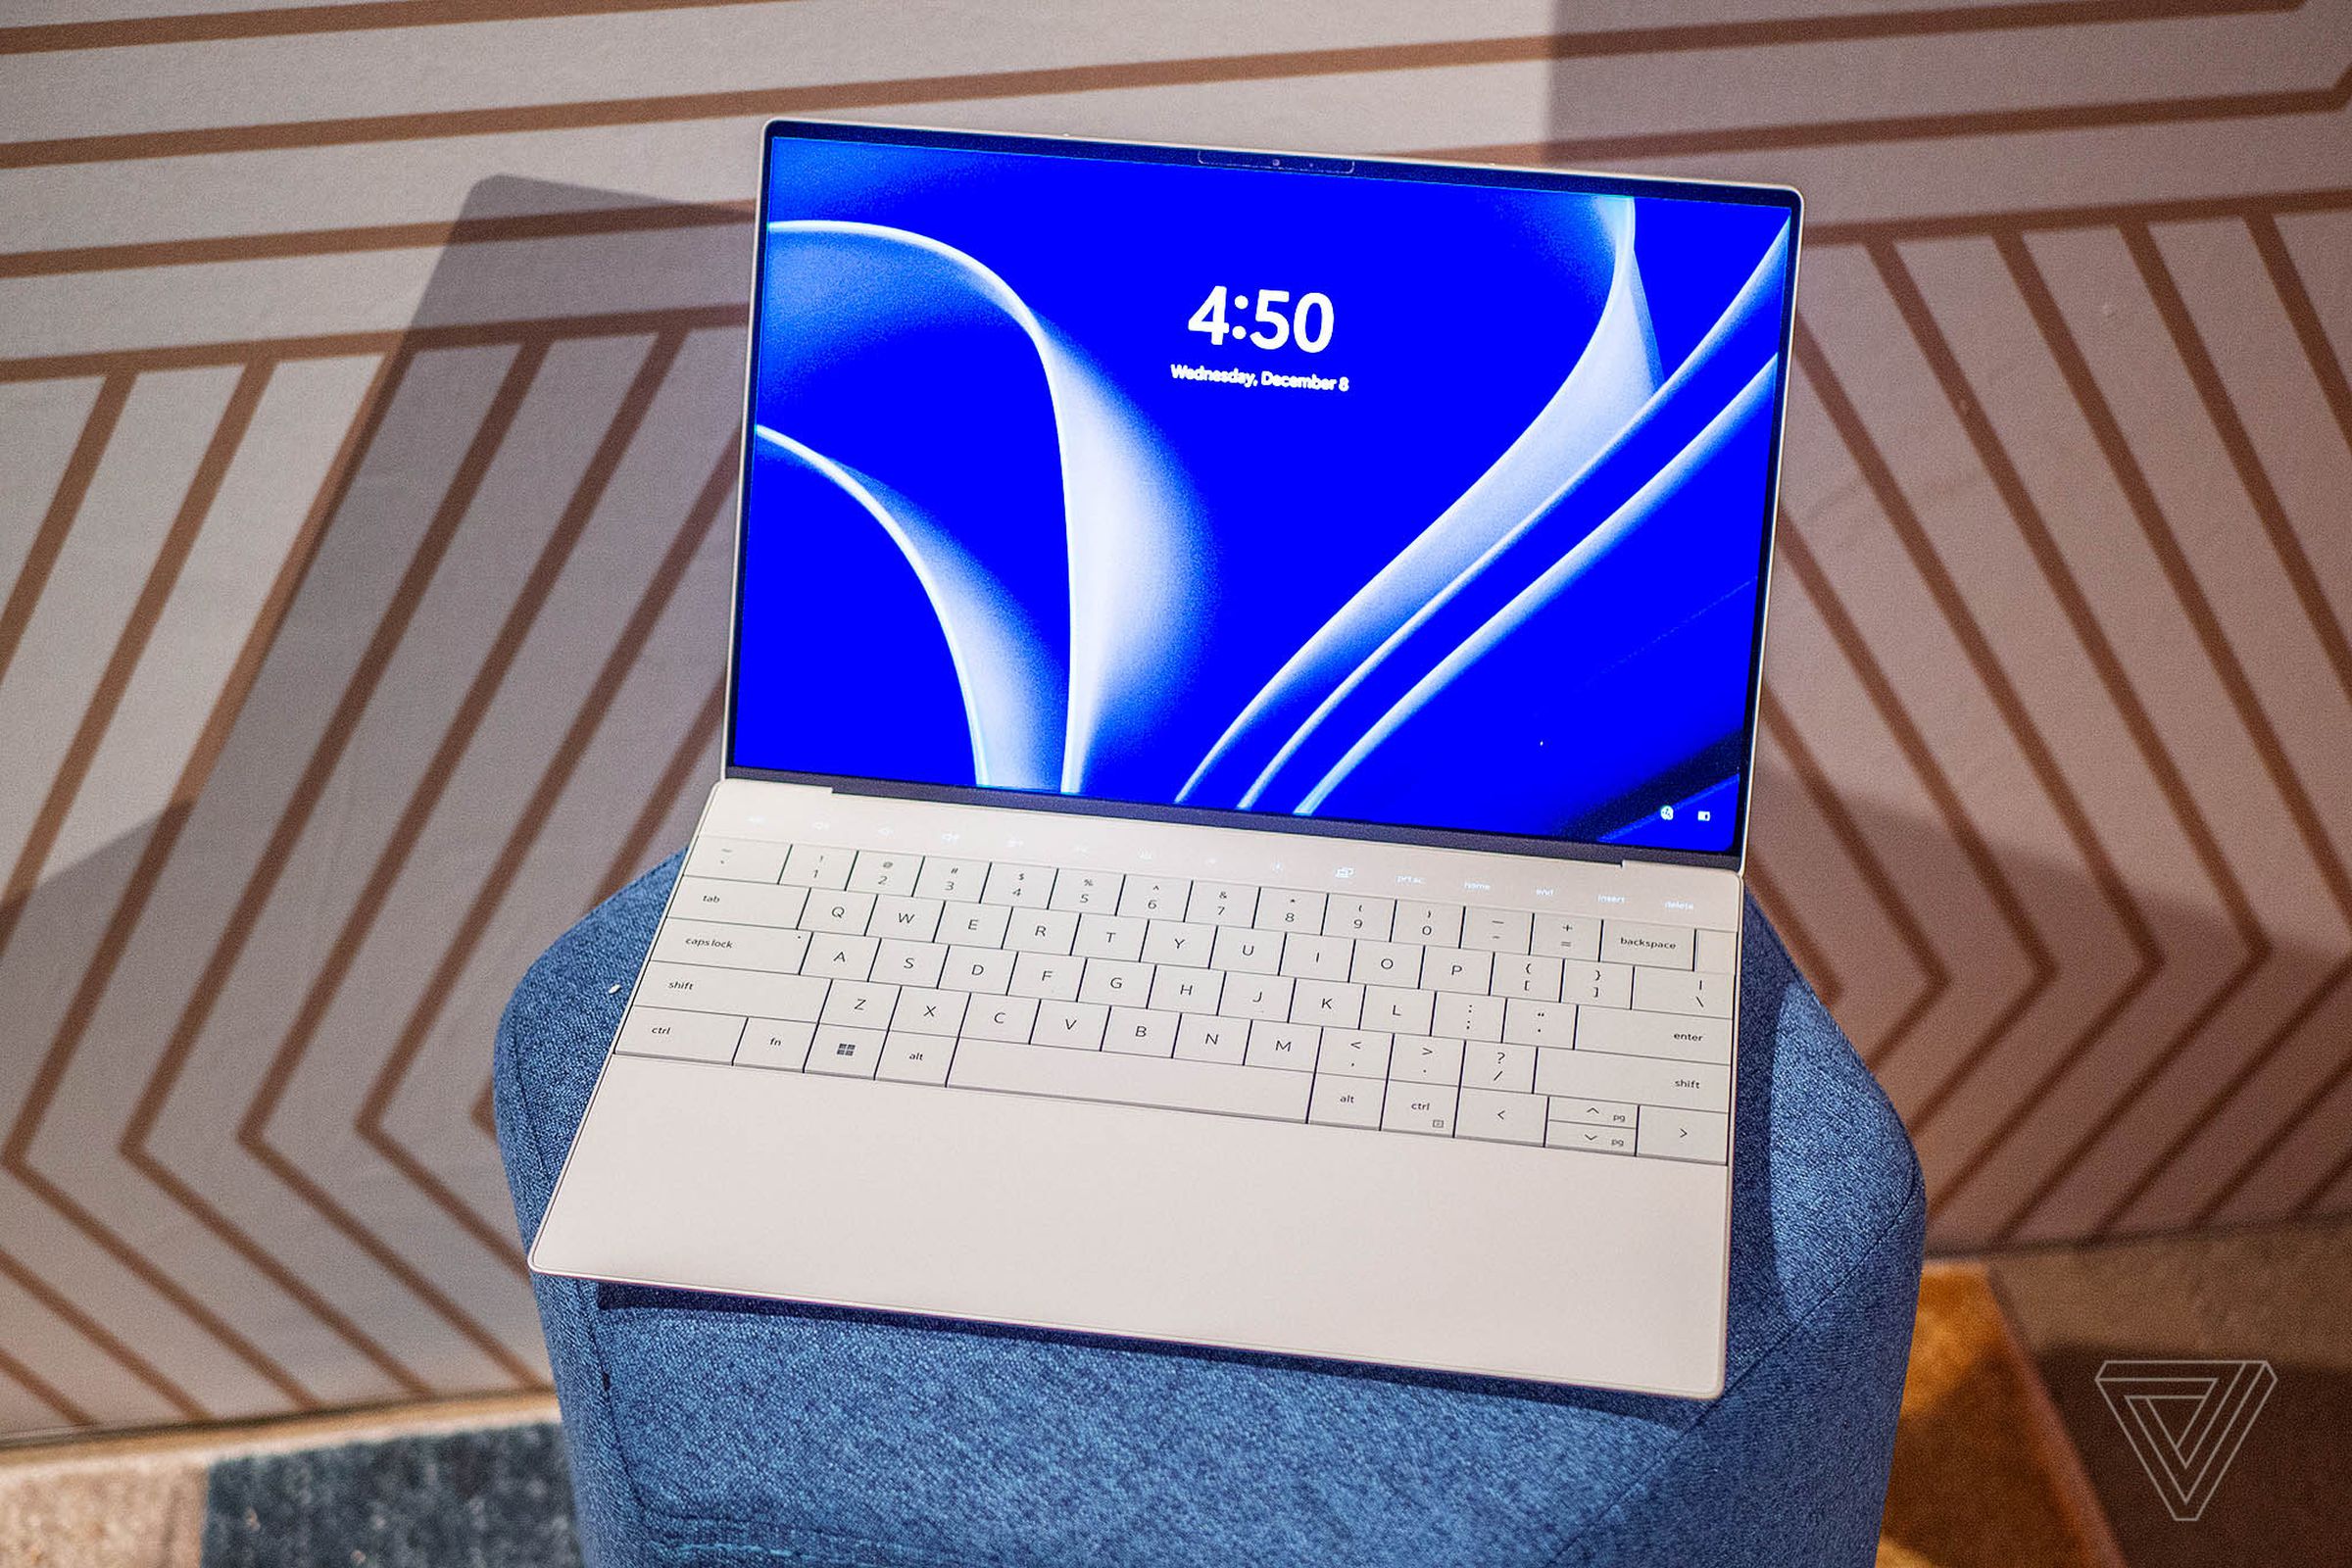 The Dell XPS 13 Plus seen from above on a blue plush stool. The screen displays a blue and white background and the time 4:50.